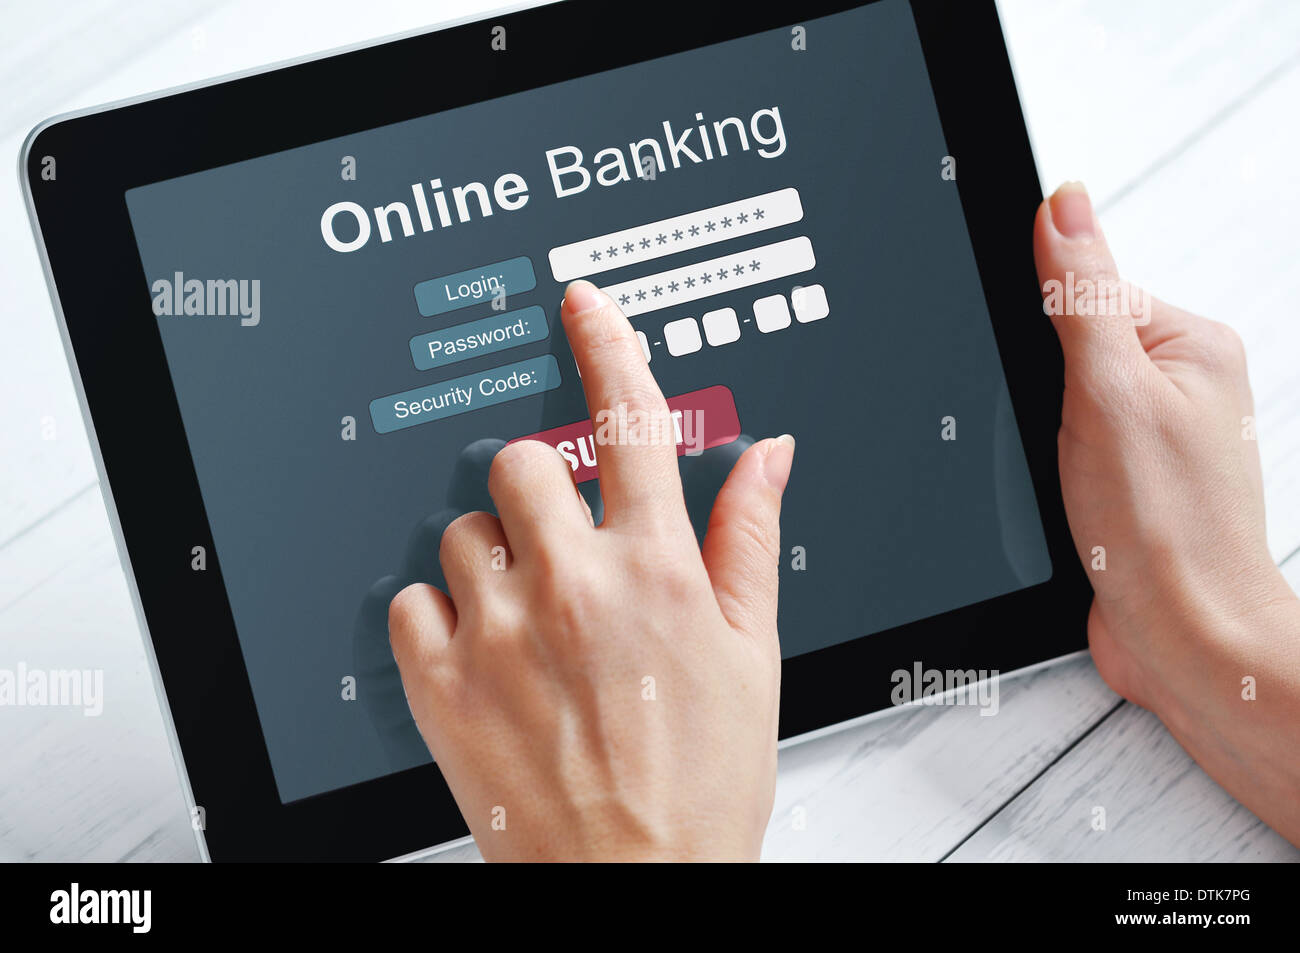 Female hands using online banking on touch screen device Stock Photo